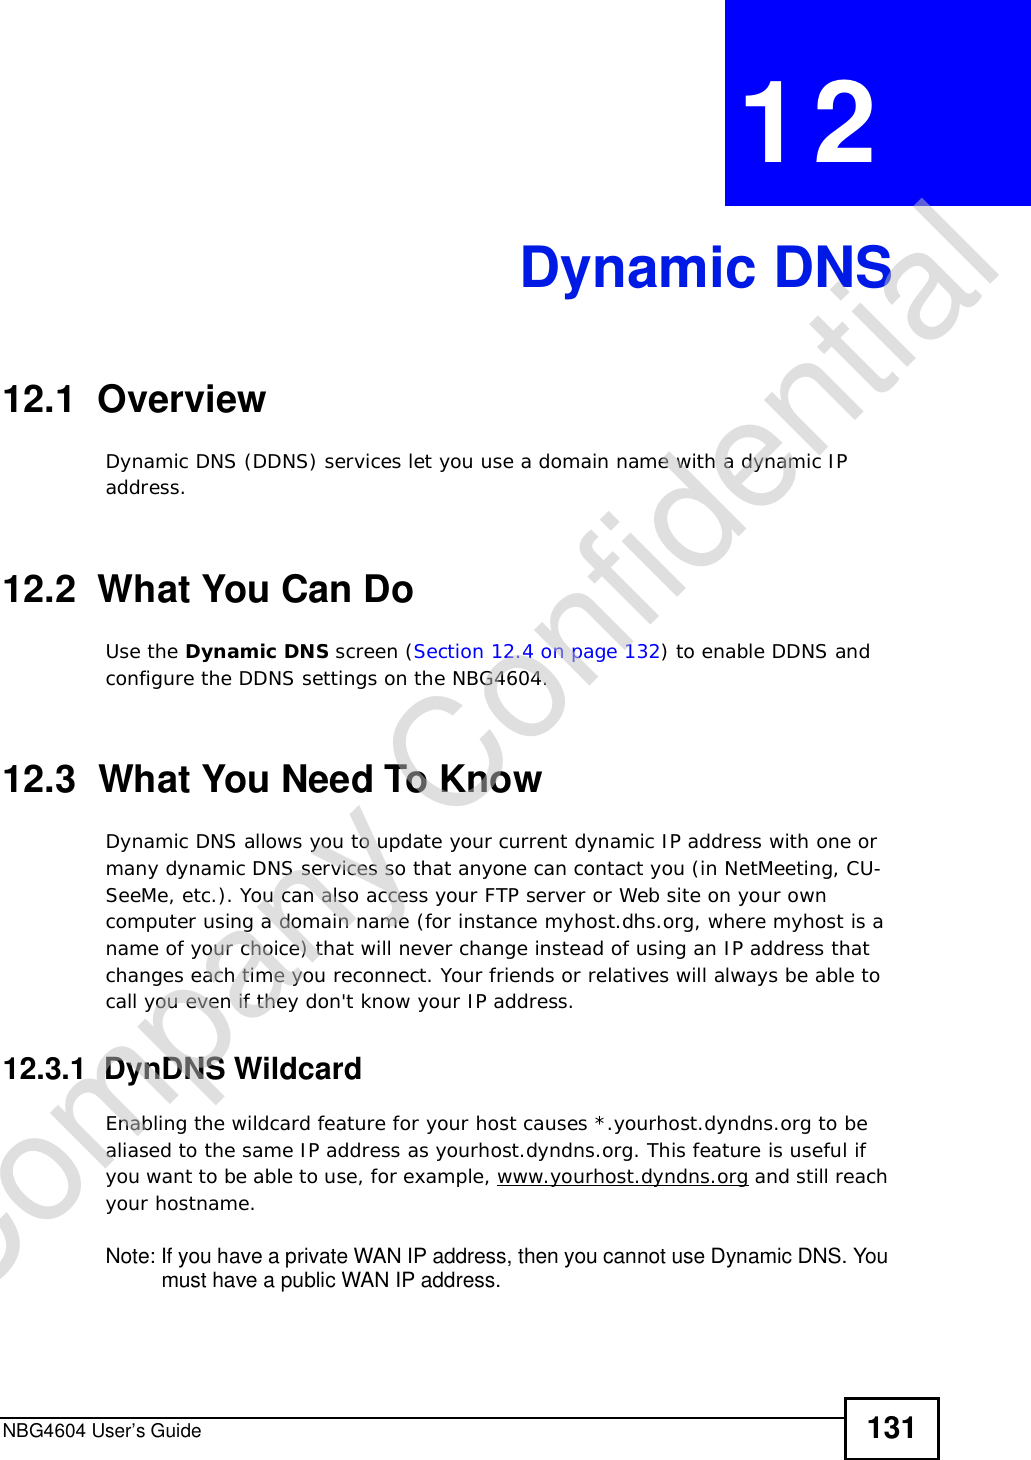 NBG4604 User’s Guide 131CHAPTER 12Dynamic DNS12.1  Overview Dynamic DNS (DDNS) services let you use a domain name with a dynamic IP address.12.2  What You Can DoUse the Dynamic DNS screen (Section 12.4 on page 132) to enable DDNS and configure the DDNS settings on the NBG4604.12.3  What You Need To KnowDynamic DNS allows you to update your current dynamic IP address with one or many dynamic DNS services so that anyone can contact you (in NetMeeting, CU-SeeMe, etc.). You can also access your FTP server or Web site on your own computer using a domain name (for instance myhost.dhs.org, where myhost is a name of your choice) that will never change instead of using an IP address that changes each time you reconnect. Your friends or relatives will always be able to call you even if they don&apos;t know your IP address.12.3.1  DynDNS Wildcard Enabling the wildcard feature for your host causes *.yourhost.dyndns.org to be aliased to the same IP address as yourhost.dyndns.org. This feature is useful if you want to be able to use, for example, www.yourhost.dyndns.org and still reach your hostname.Note: If you have a private WAN IP address, then you cannot use Dynamic DNS. You must have a public WAN IP address.Company Confidential